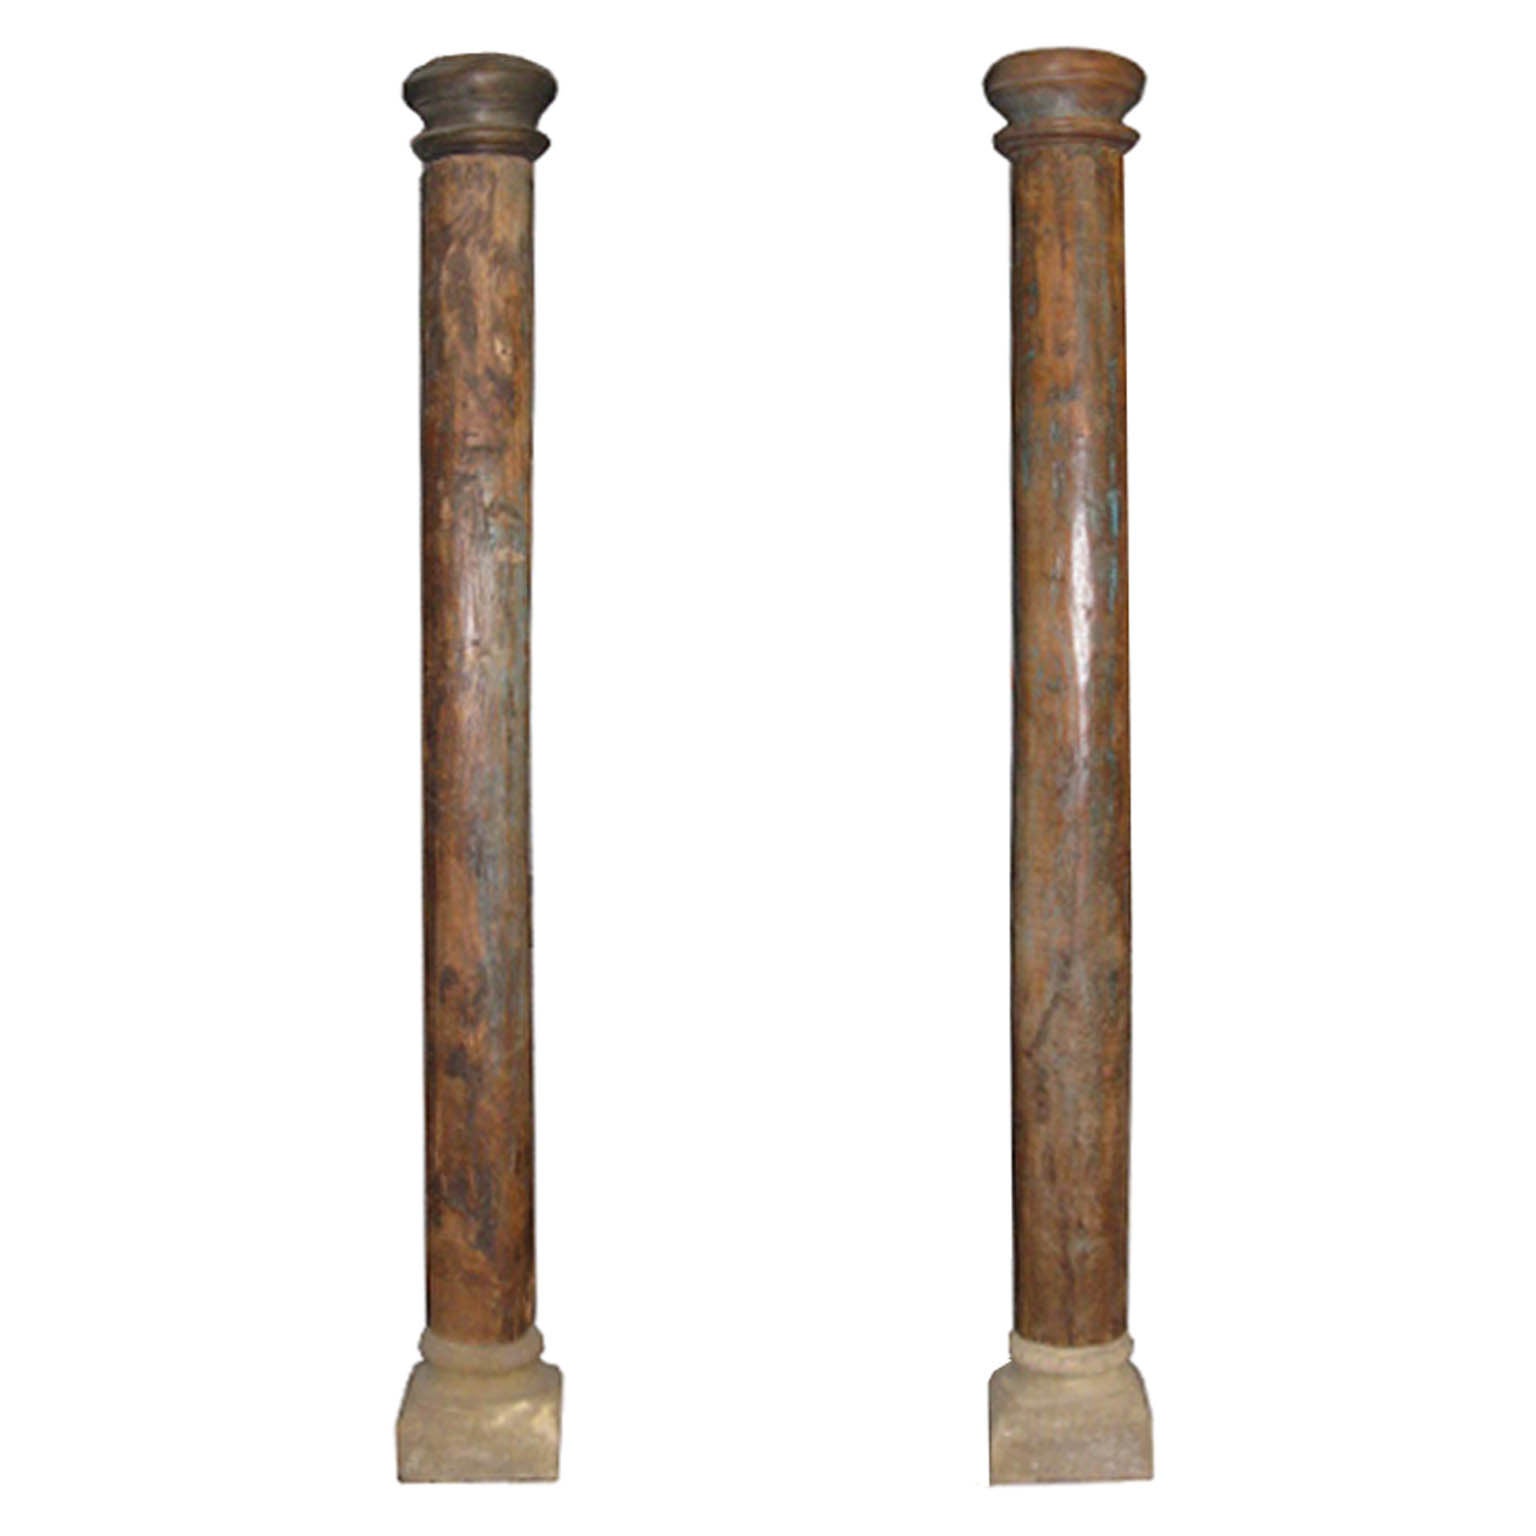 Pair of Columns with Stone Base